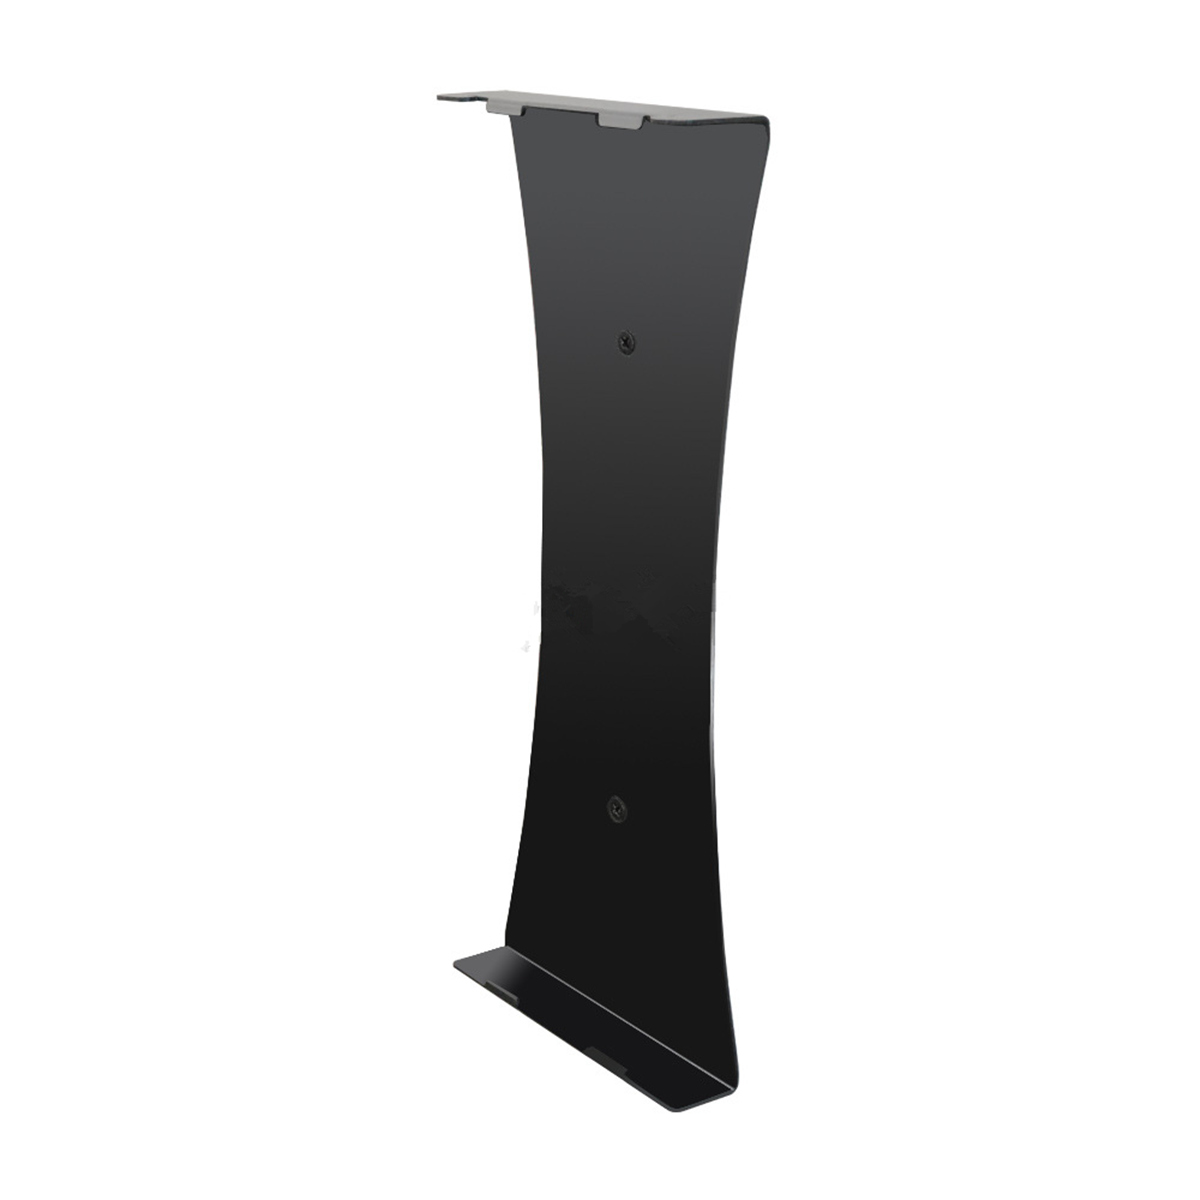 Ultra Slim Vertical Wall Mount Stand Holder Bracket For XBOX ONE X Game Console 9